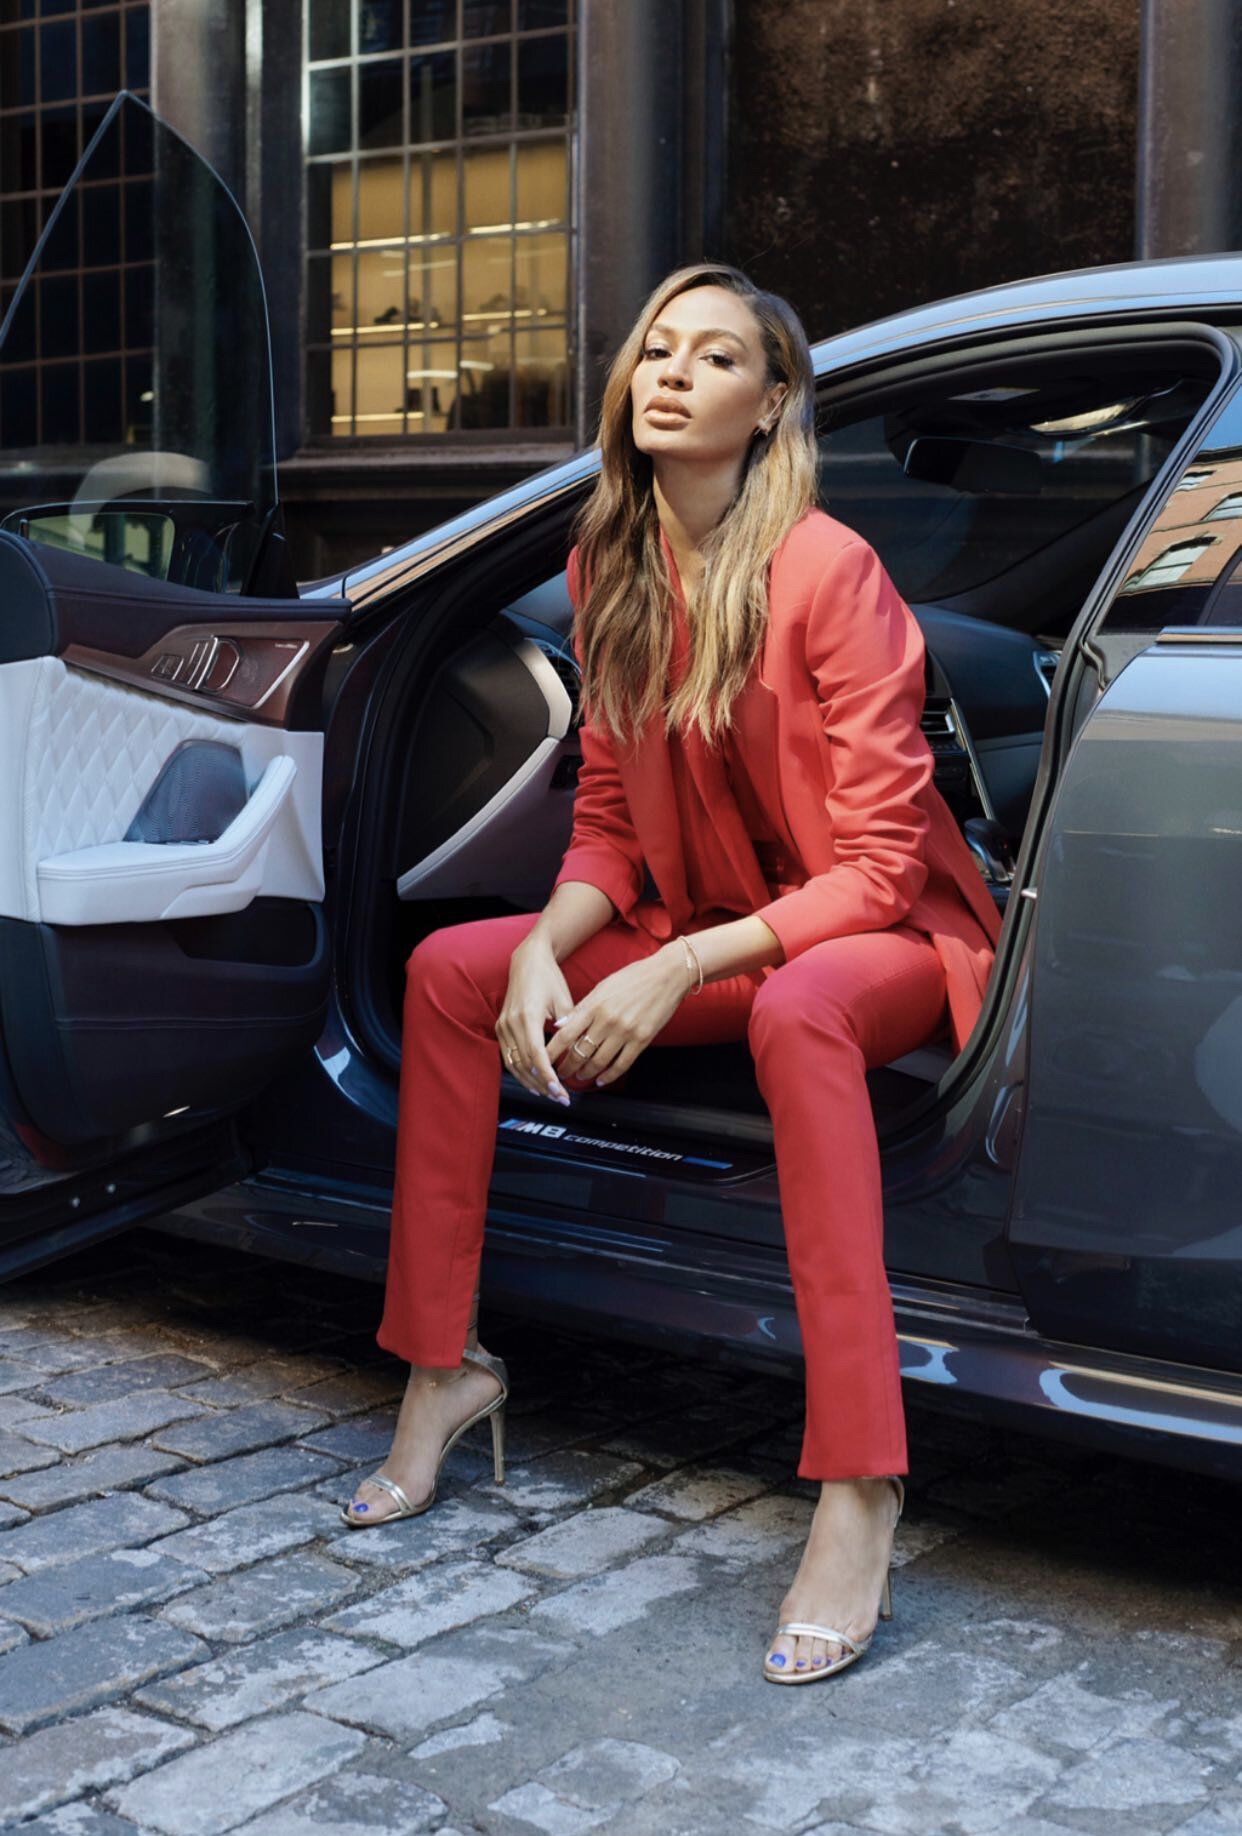  Joan Smalls for New York Fashion Week  x BMW 2020 Campaign    styled by Vance Gamble  